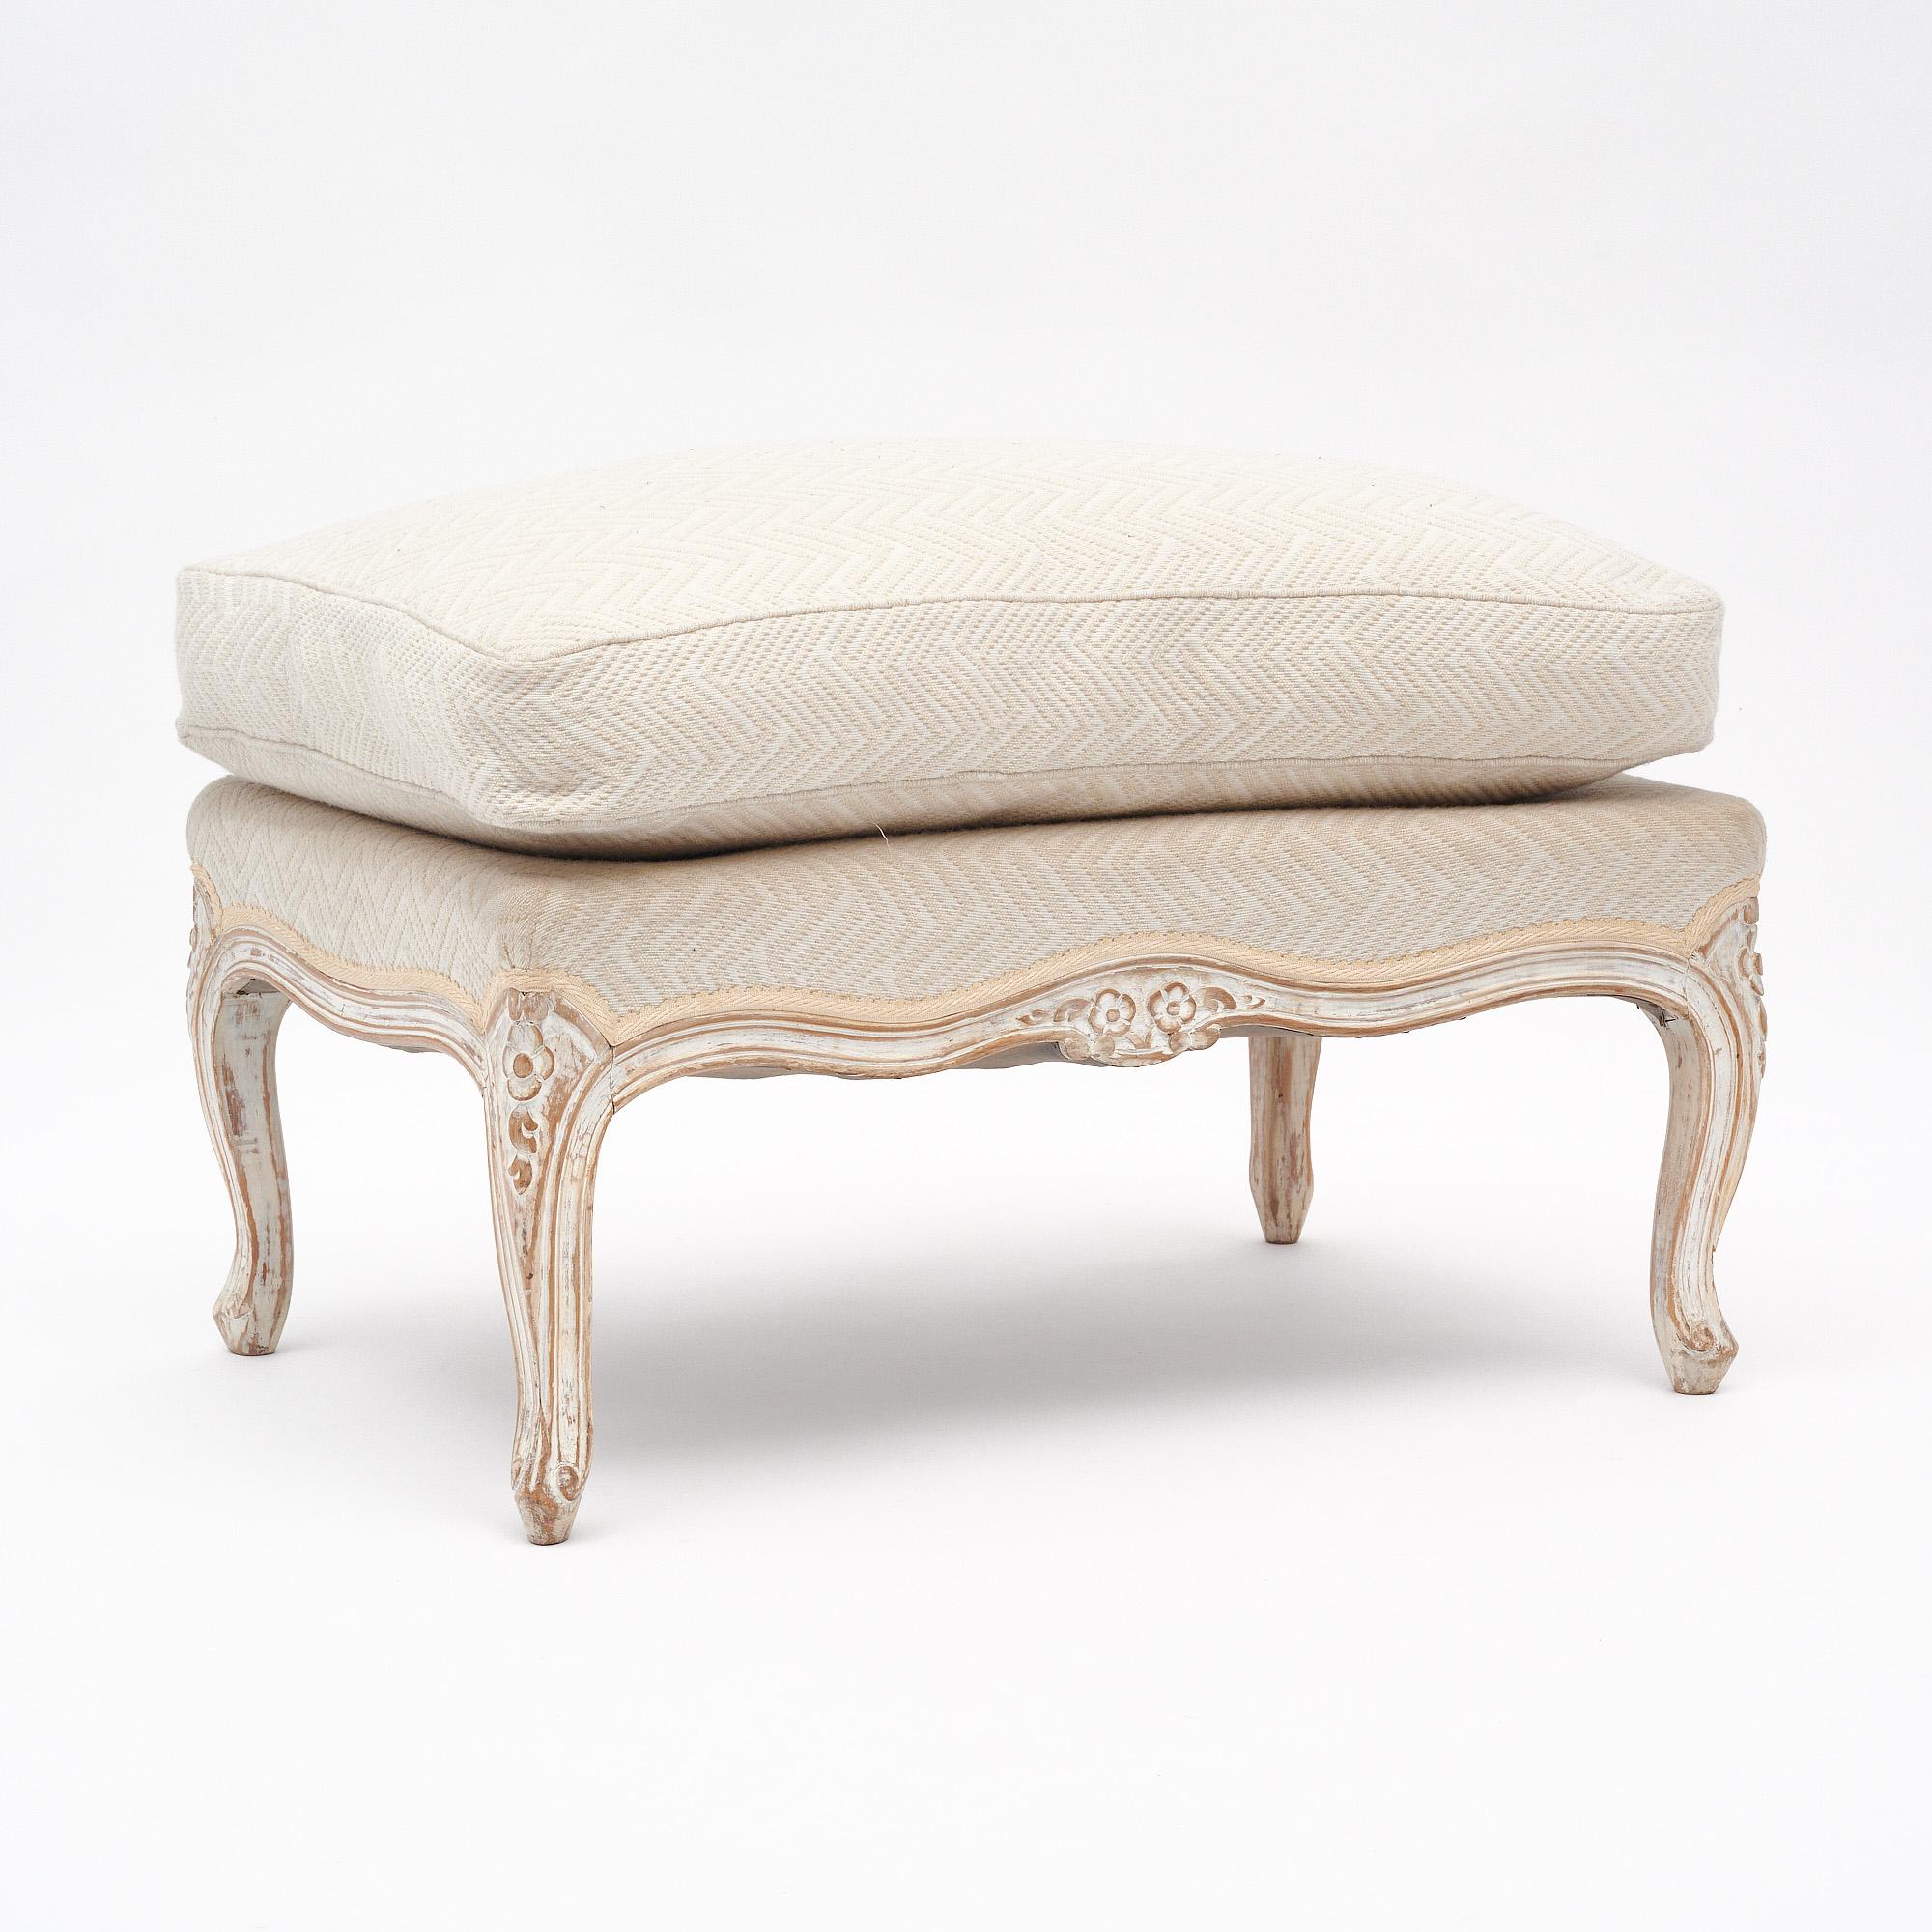 Ottoman from France in the Louis XV style. This piece features a hand-carved wood frame with original white paint and patina. The carving includes floral detailing. The upholstery is newly done in a white fabric.
